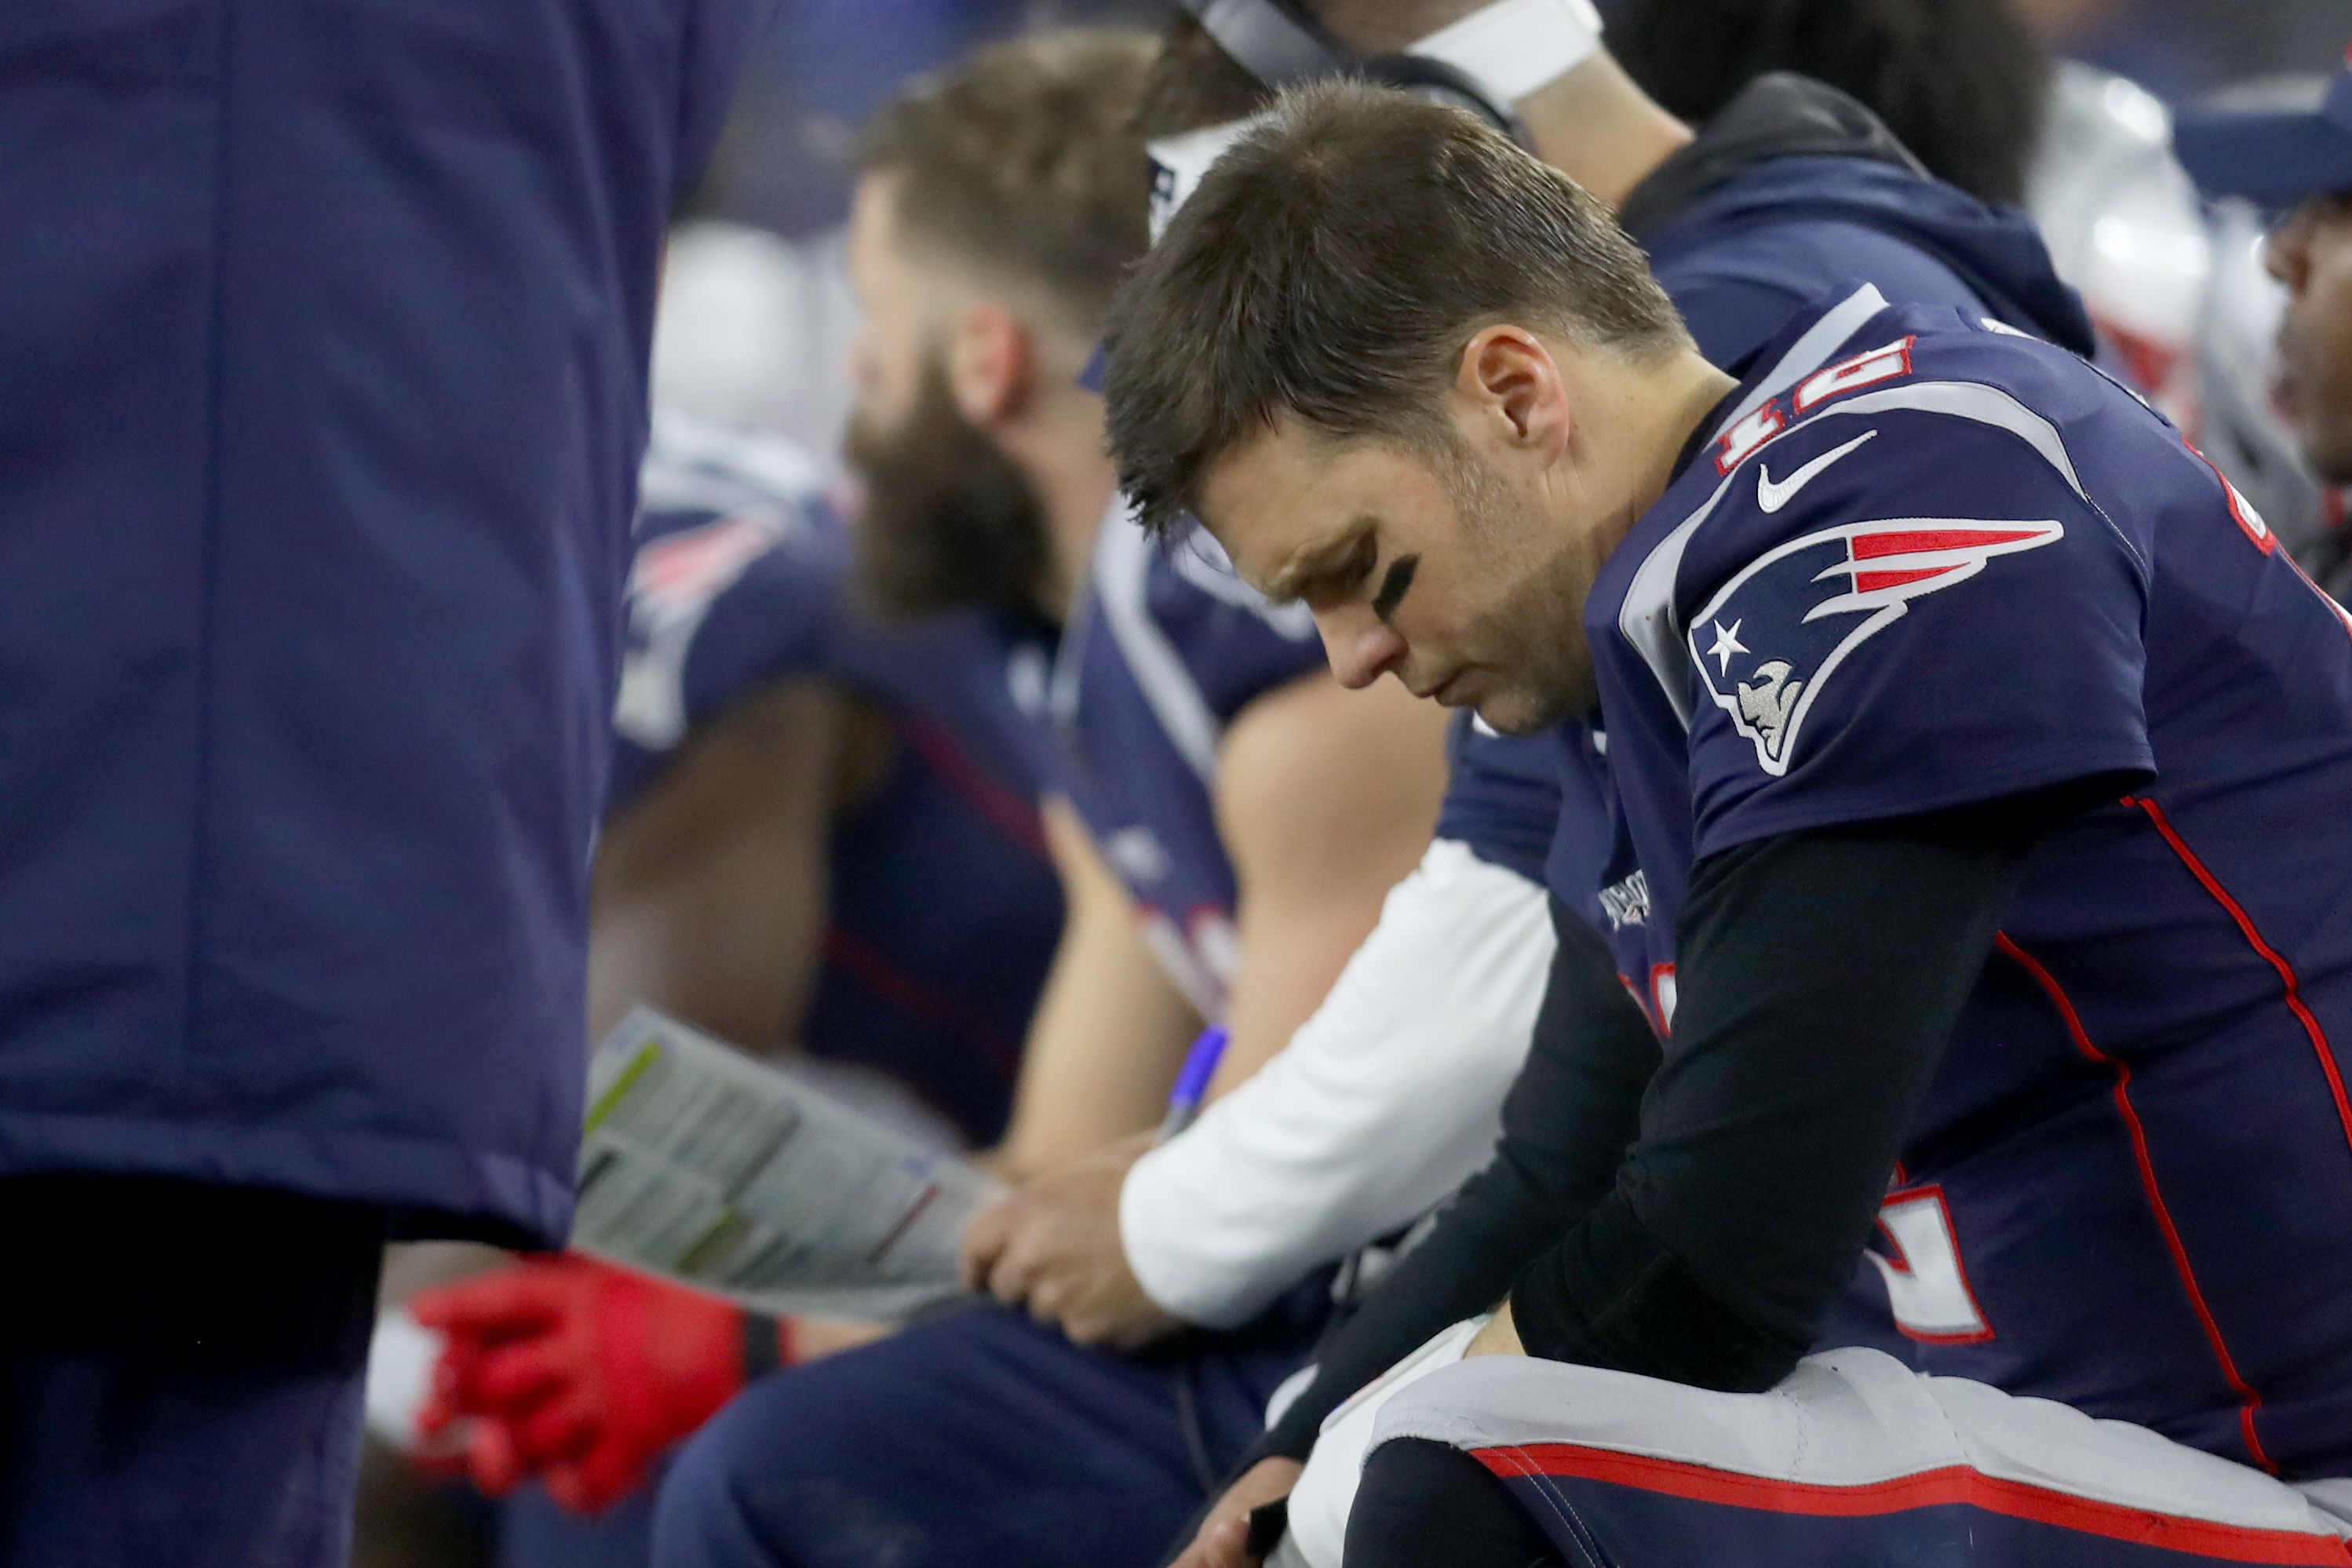 After playoff dud, Brady faces choice of whether to continue